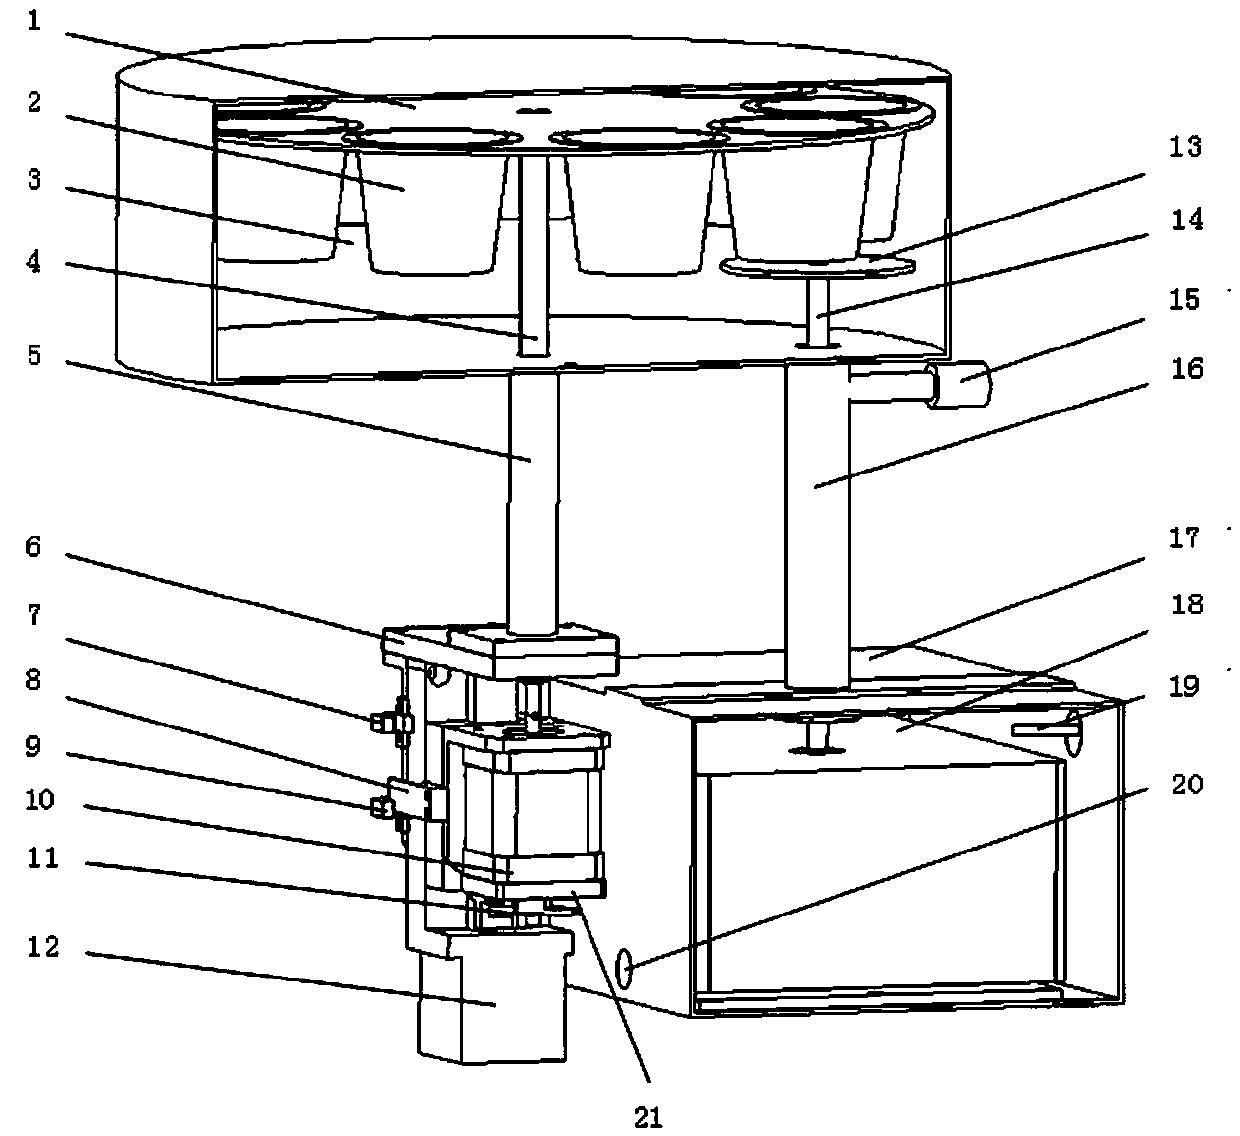 Automatic weighing device for detecting moisture adsorption and desorption performance of tobaccos